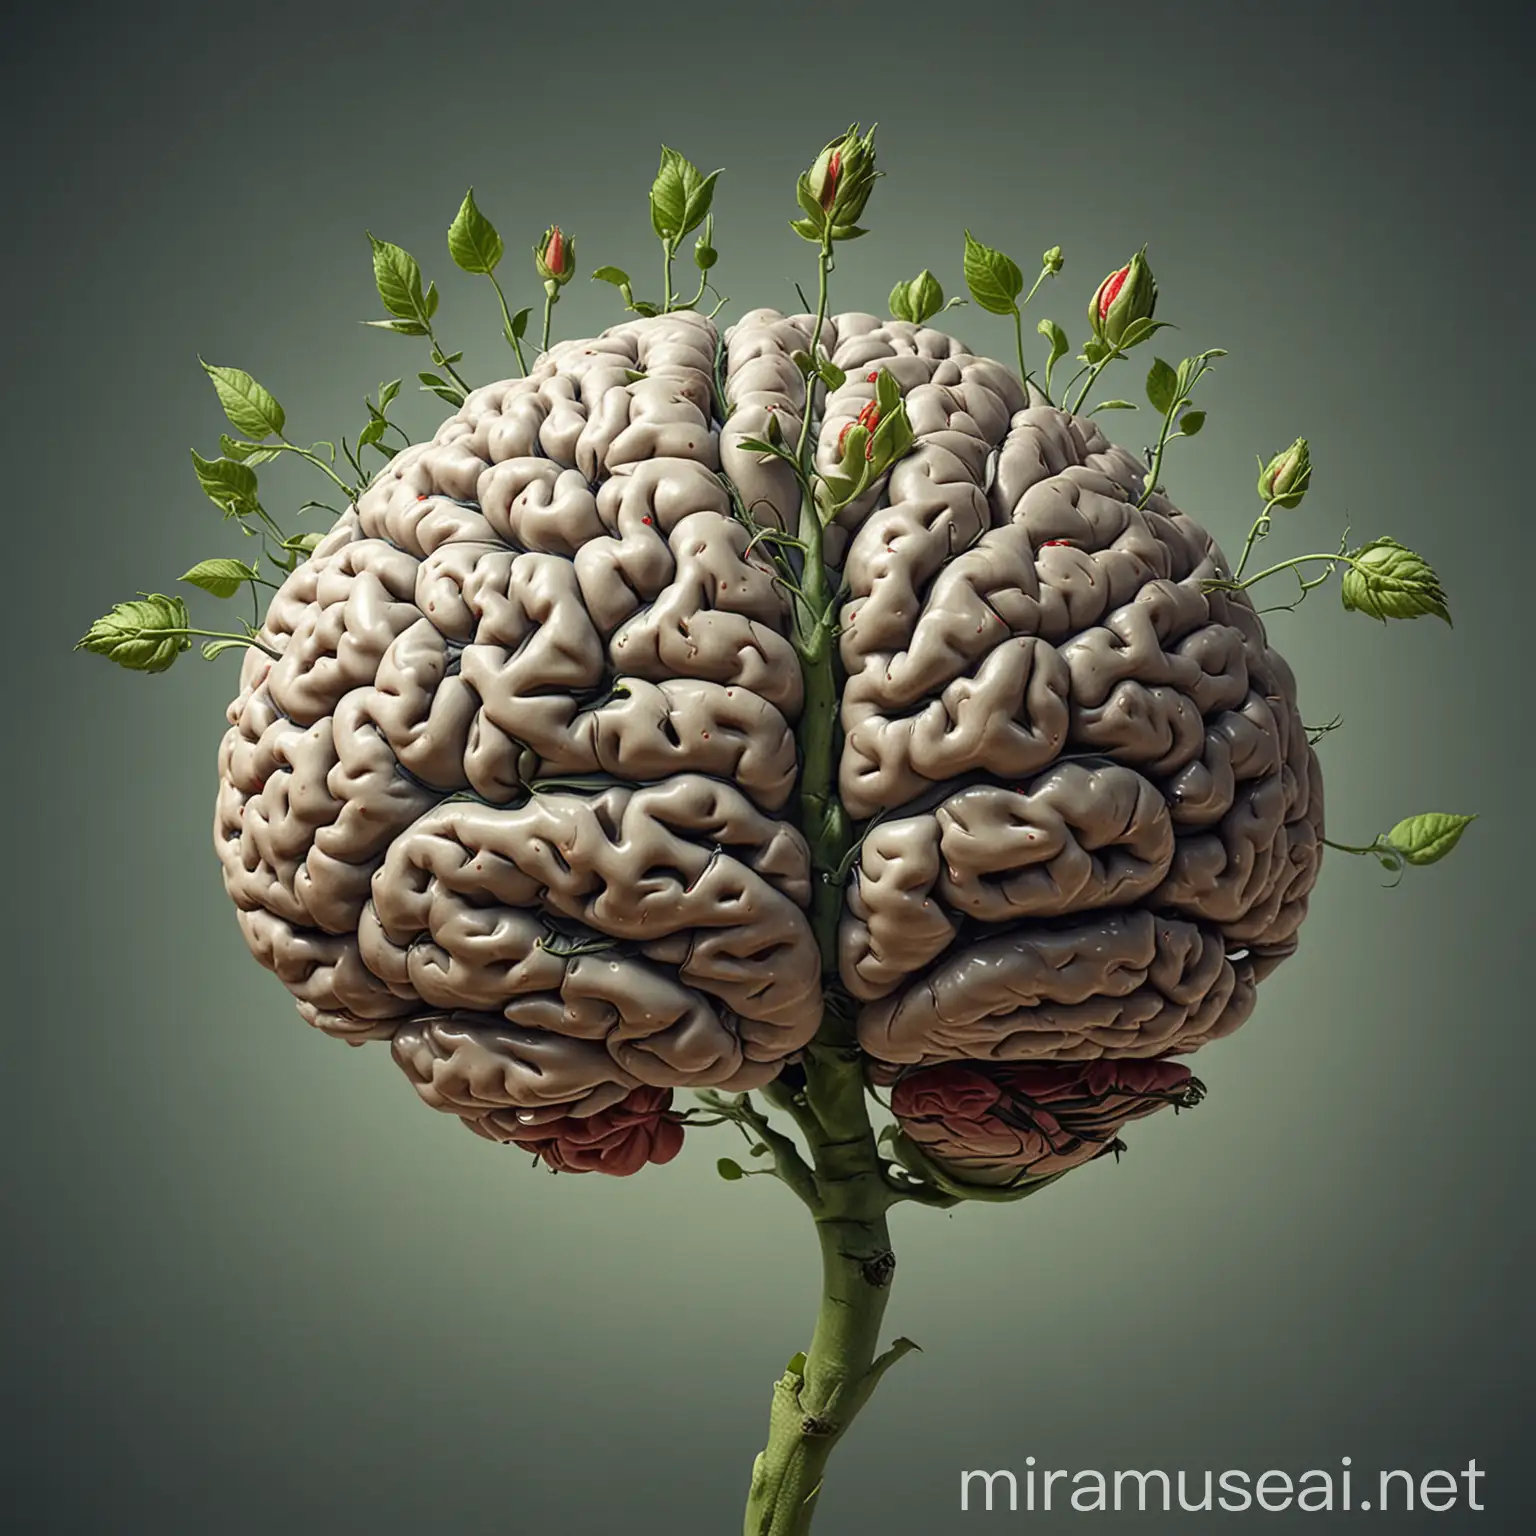 Brain with Growing Bud Conceptual Artwork Depicting Growth and Potential